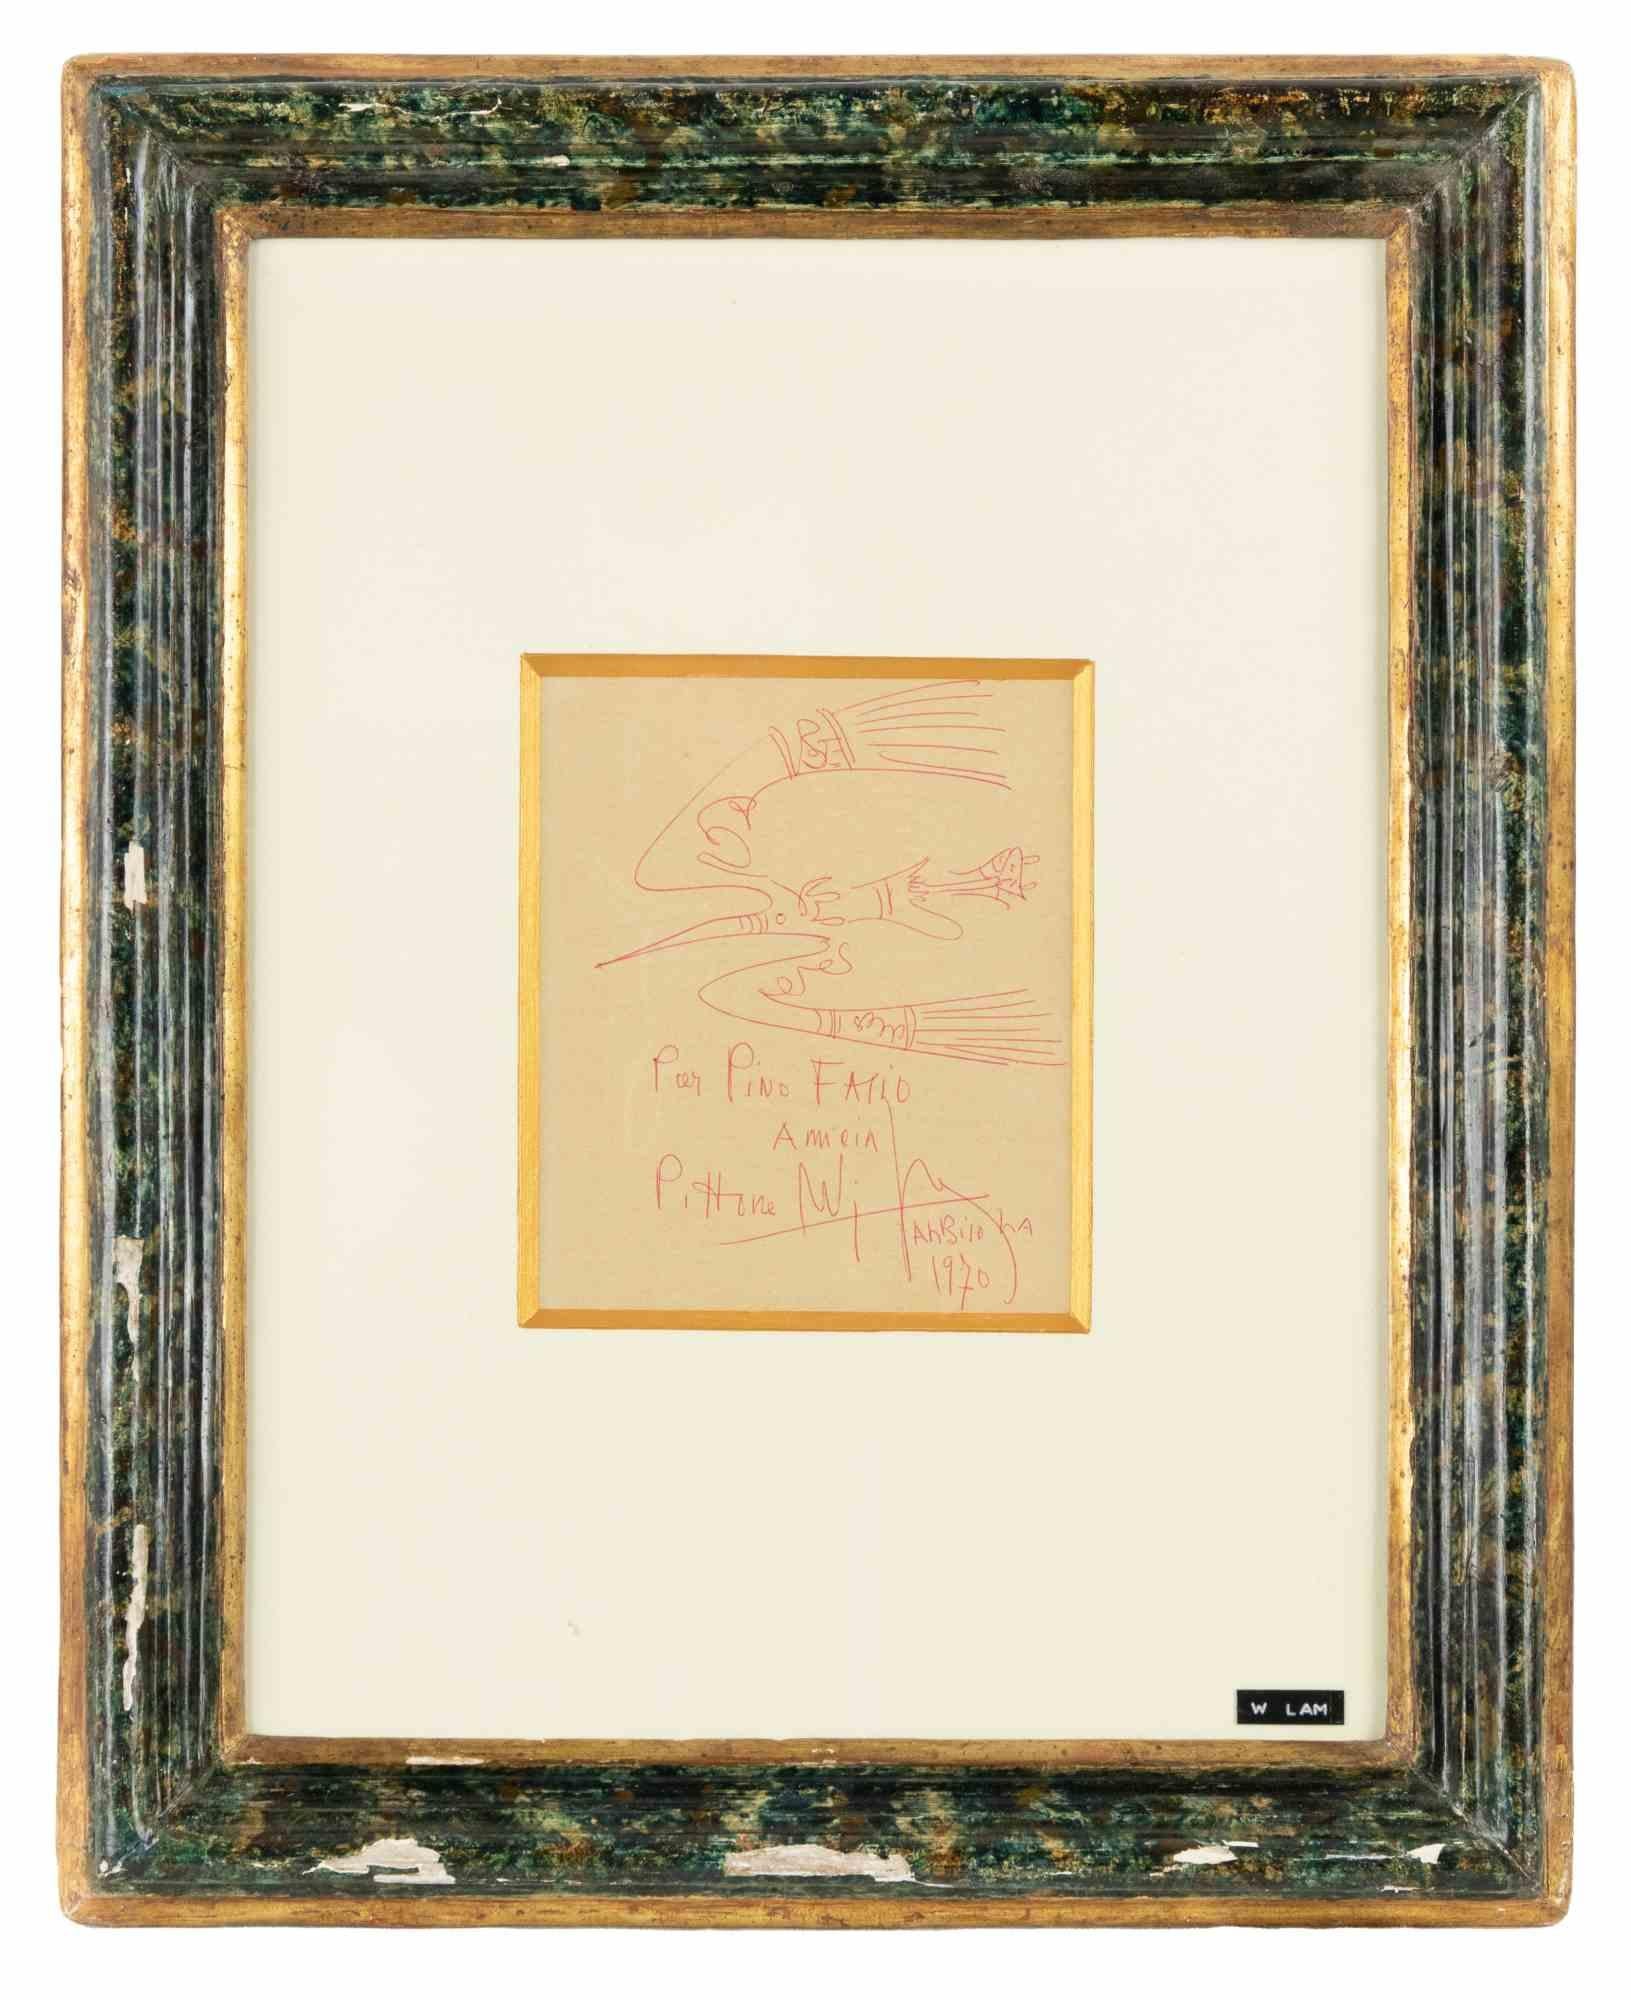 Wonderful fresh sketch in red ink on an ivory-colored paper, with an autograph dedication 